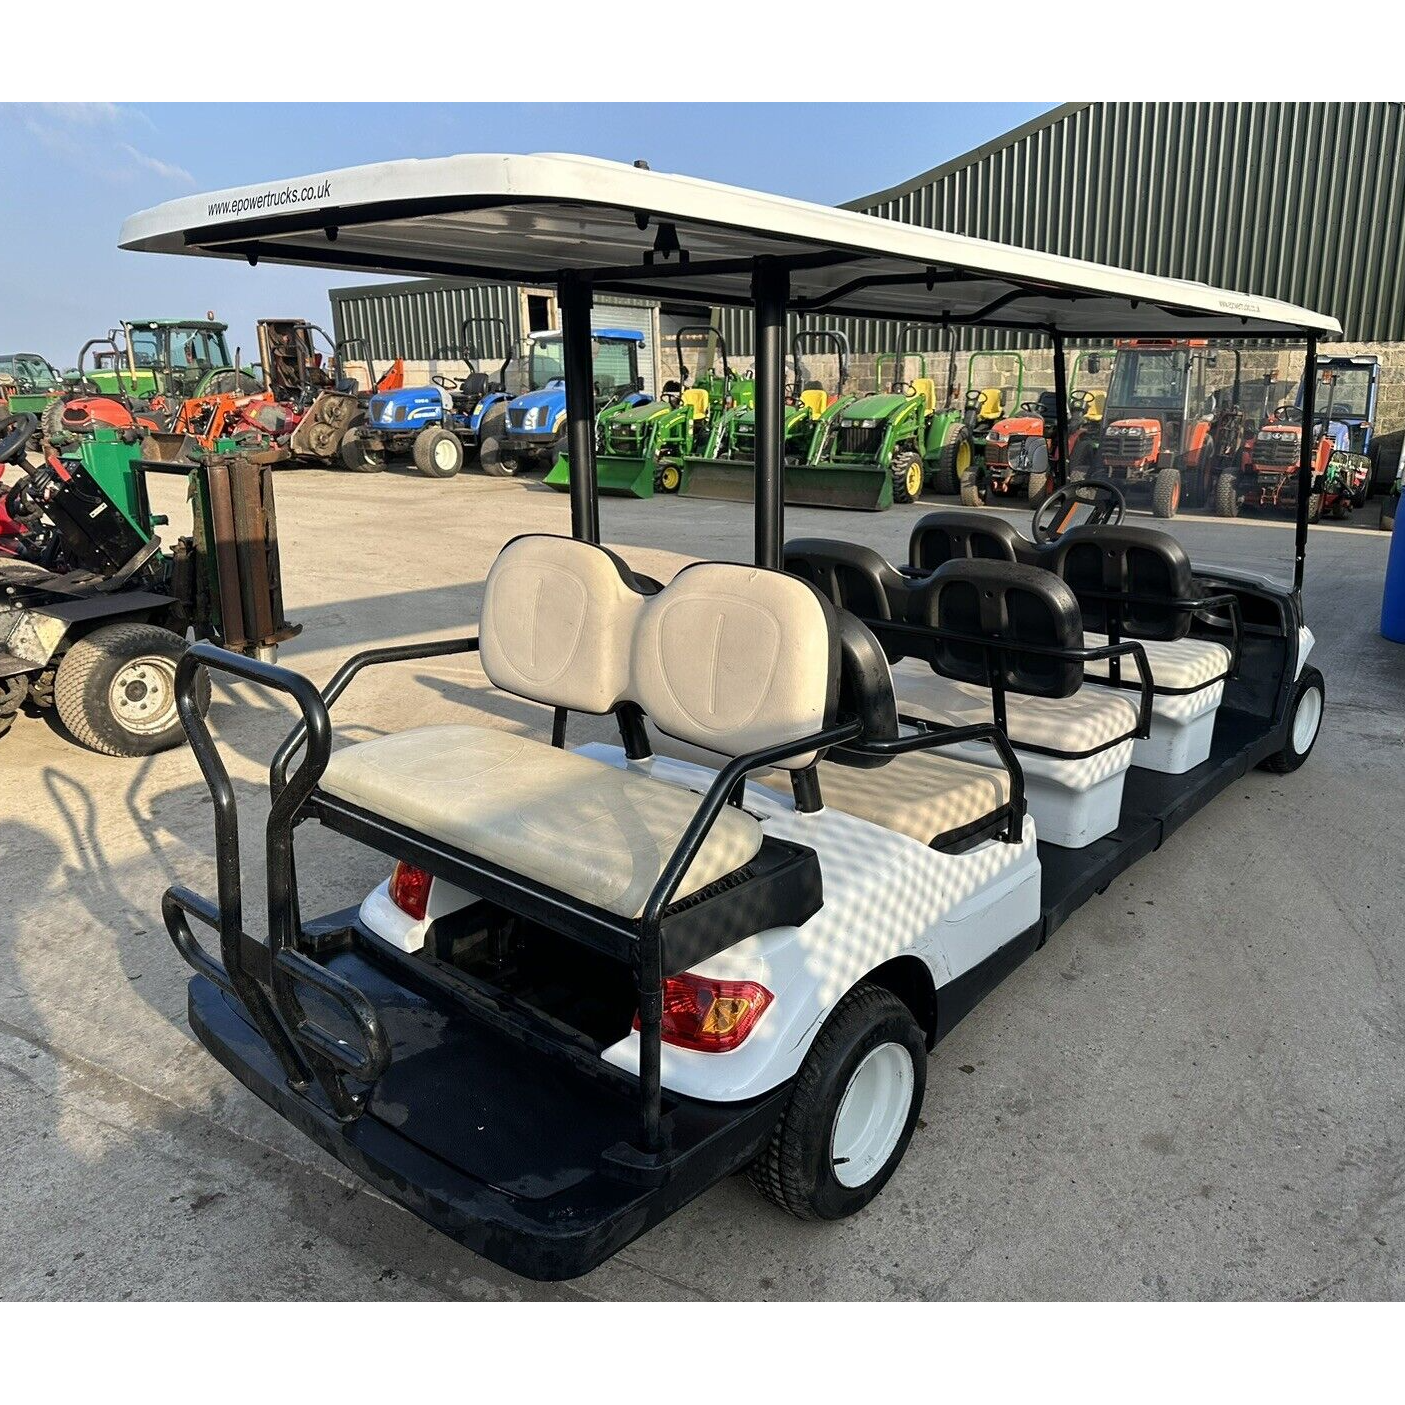 2017 EPOWER TRUCKS EP8 48V ELECTRIC PEOPLE CARRIER GOLF BUGGY